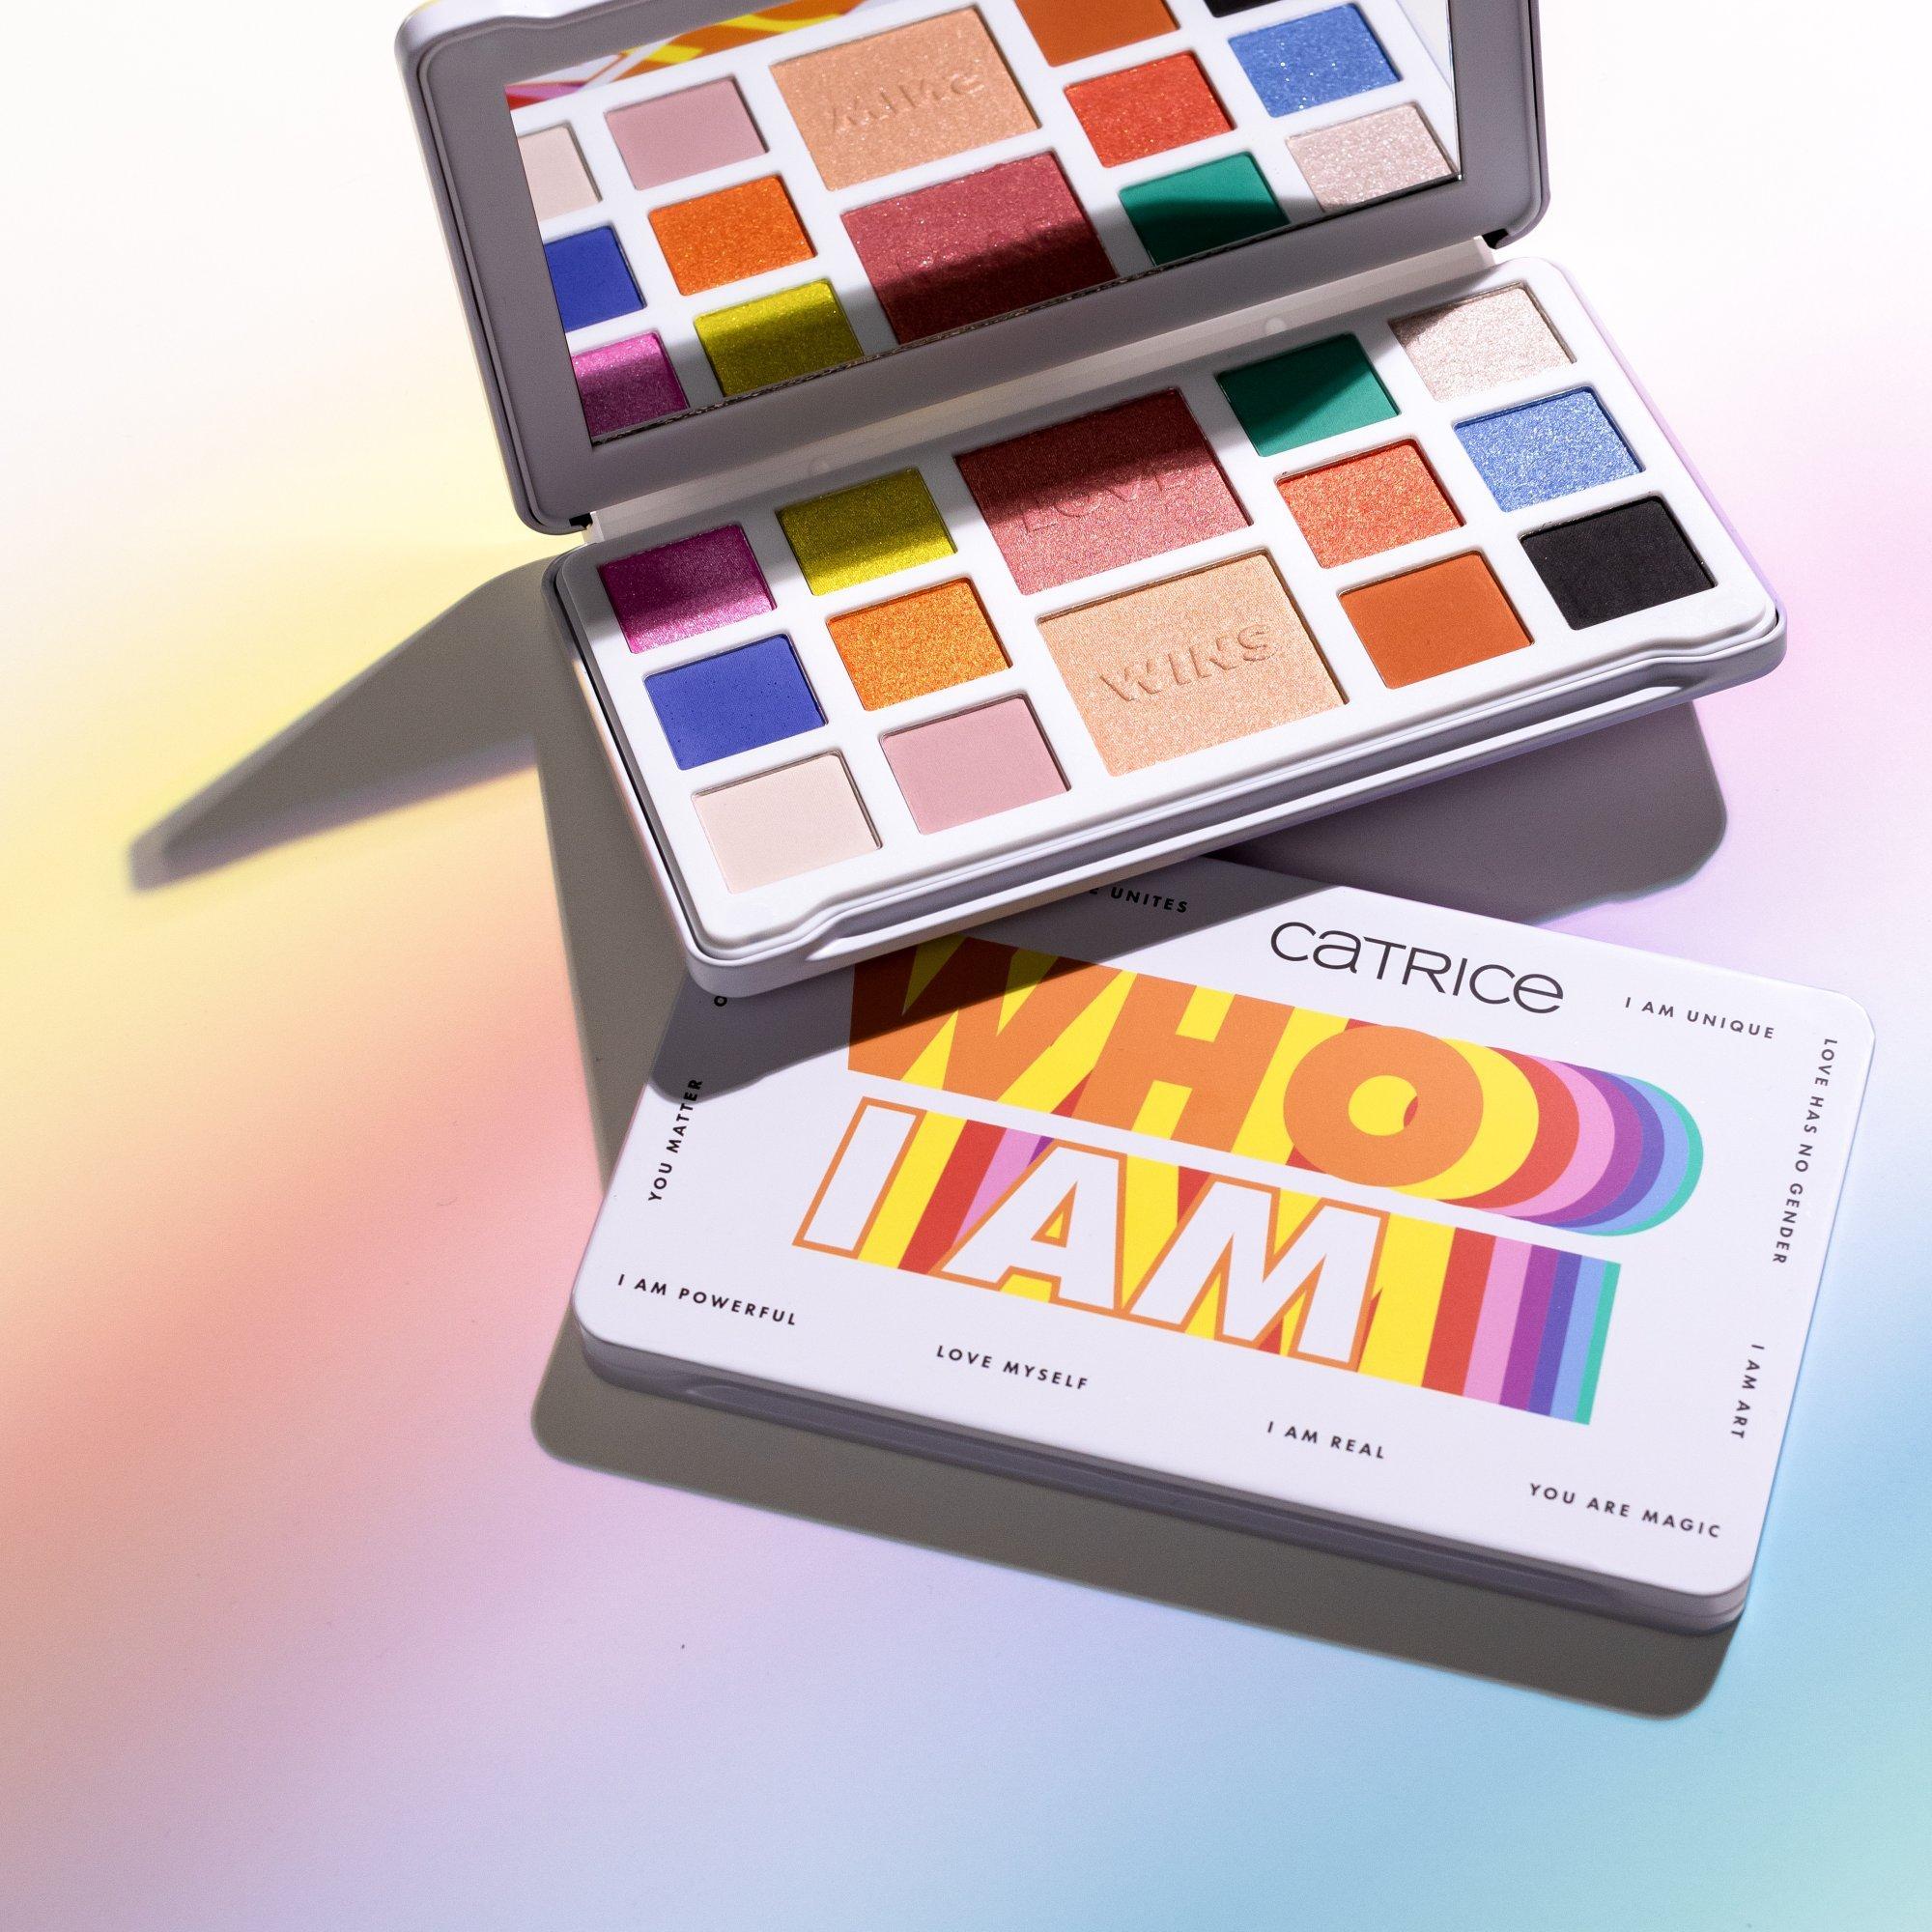 WHO I AM Eyeshadow & Face Palette